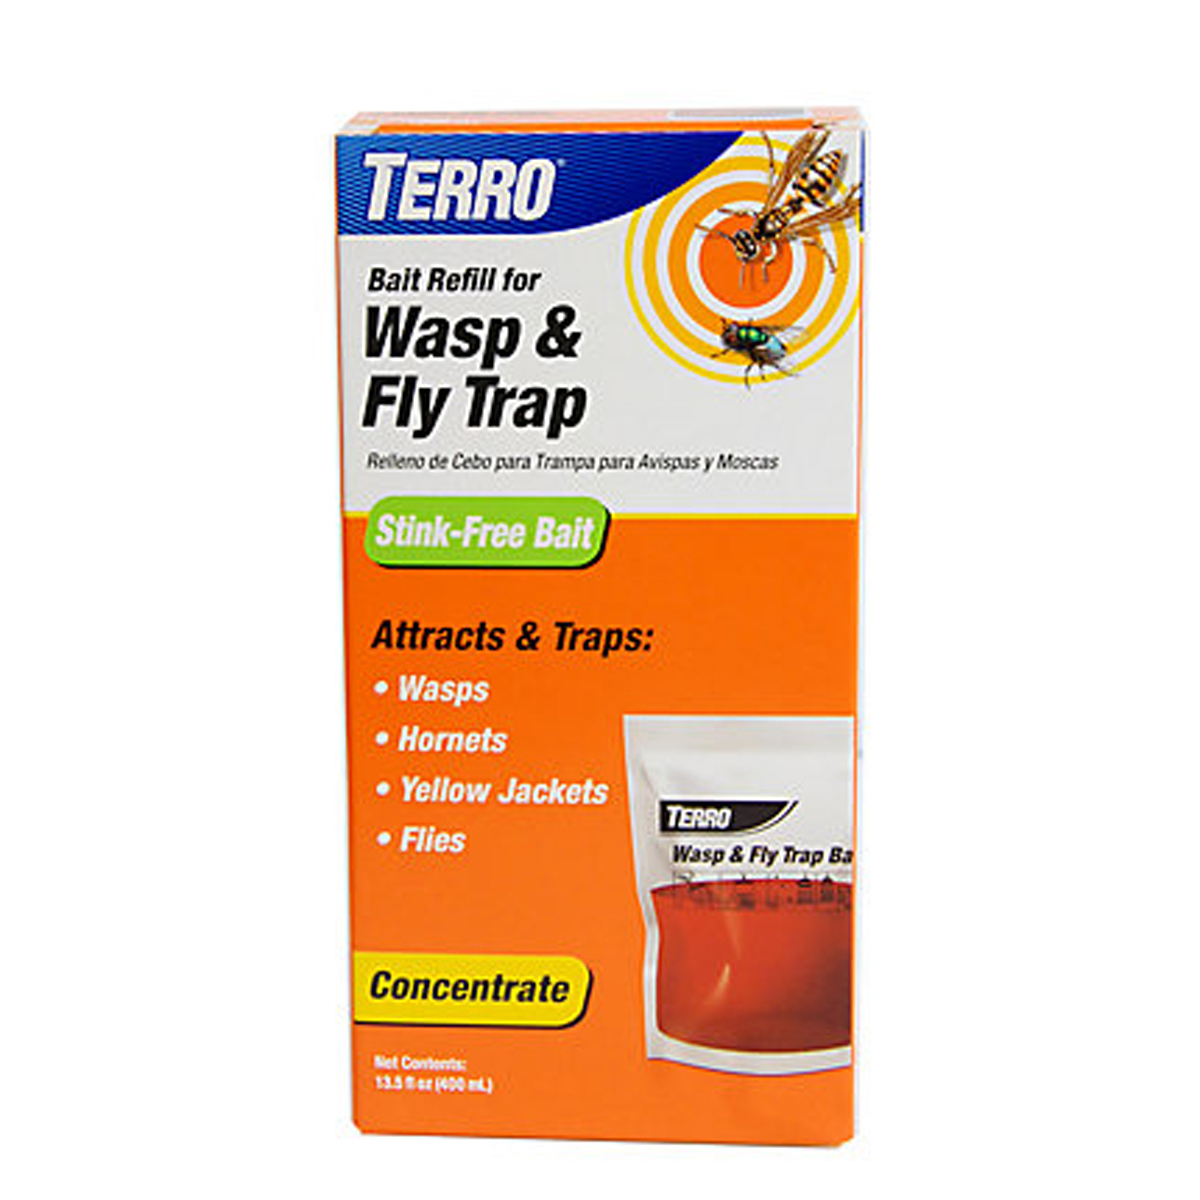 Picture of Terro Wasp & Fly Trap - Large Refill